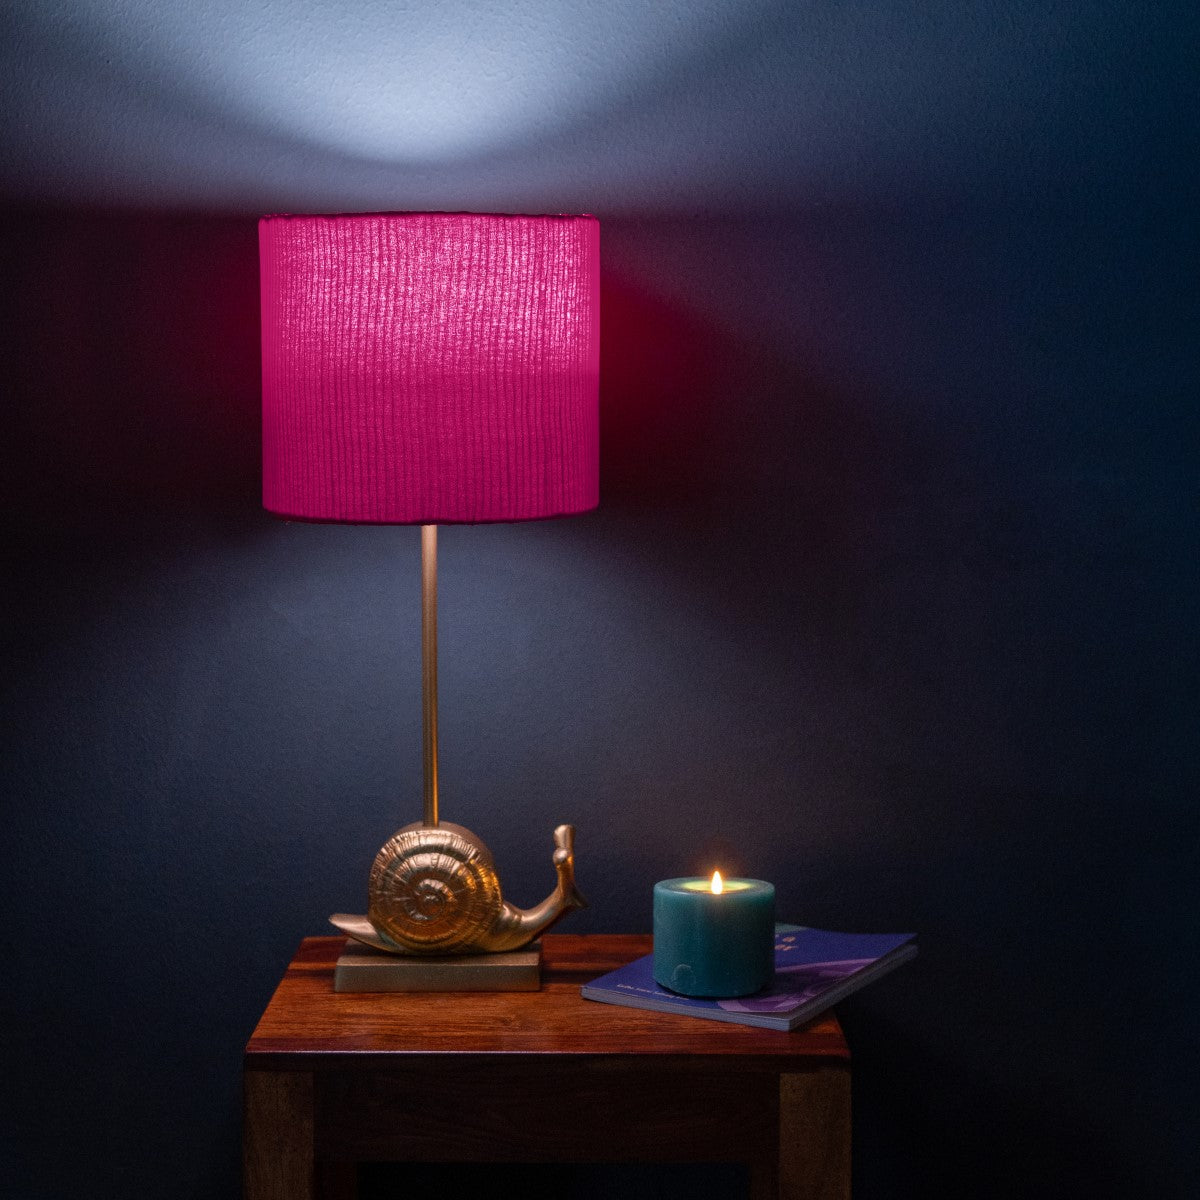 The Snail Lamp with Hot Pink Shade